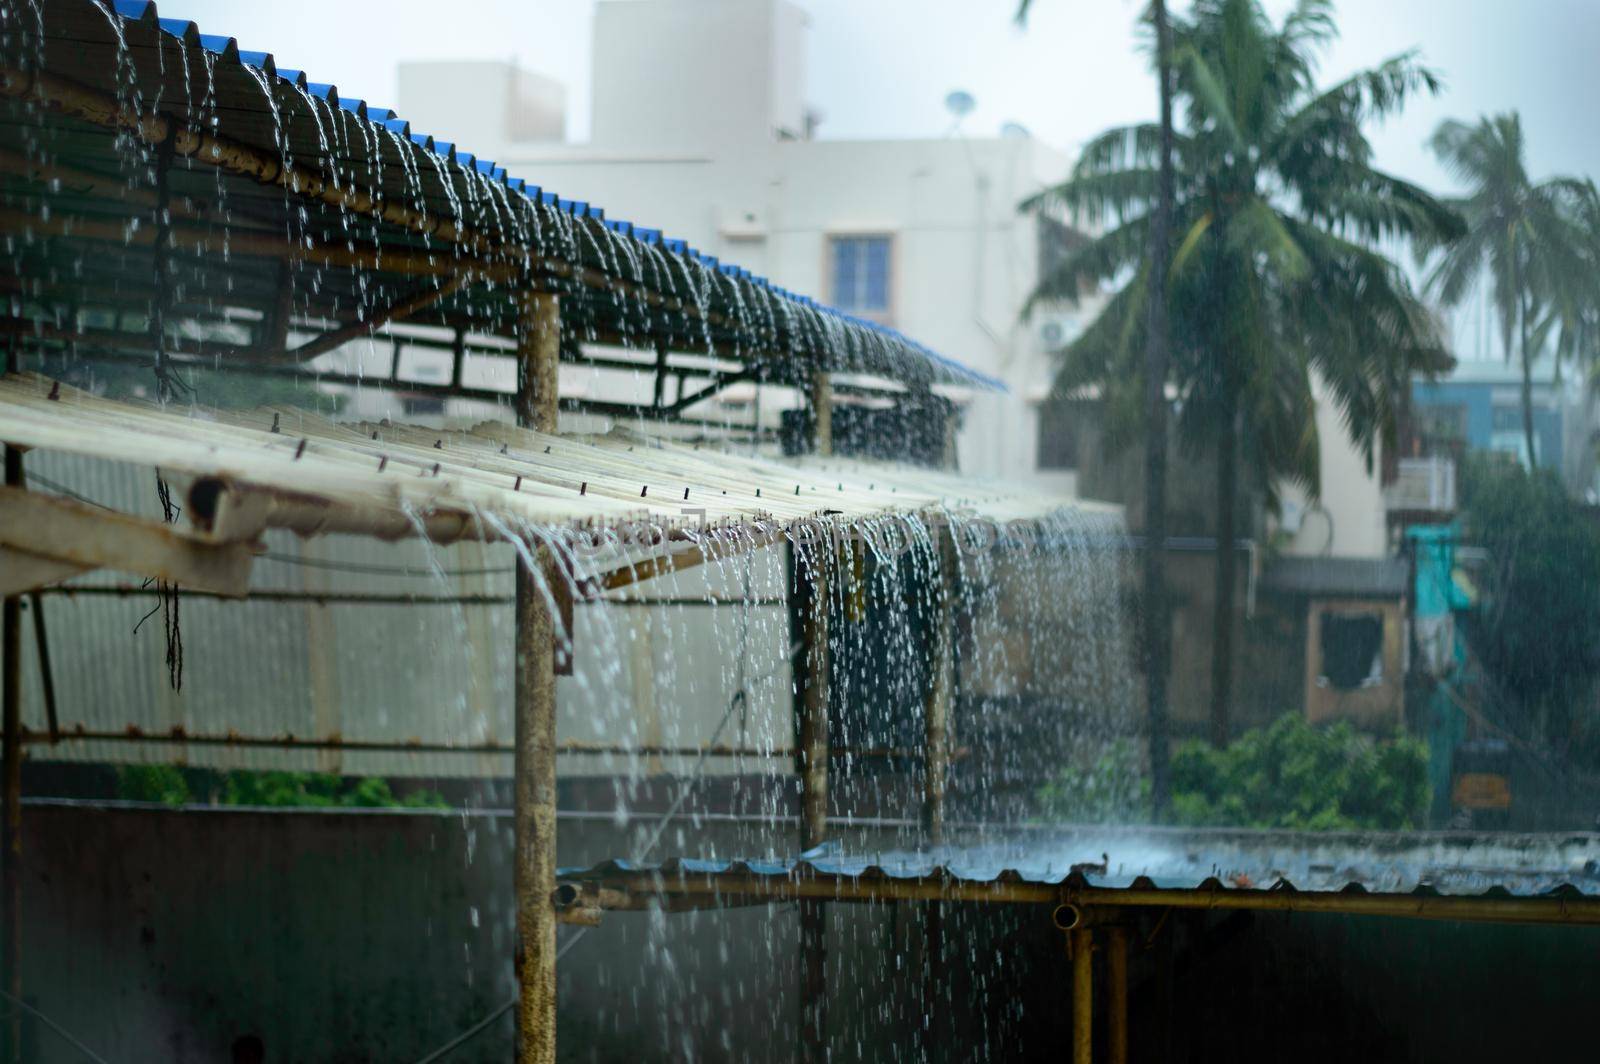 Rain on a Tin Roof. Rain Falling from the Roof. Rainy day nature background. Selective Focus on Foreground by sudiptabhowmick